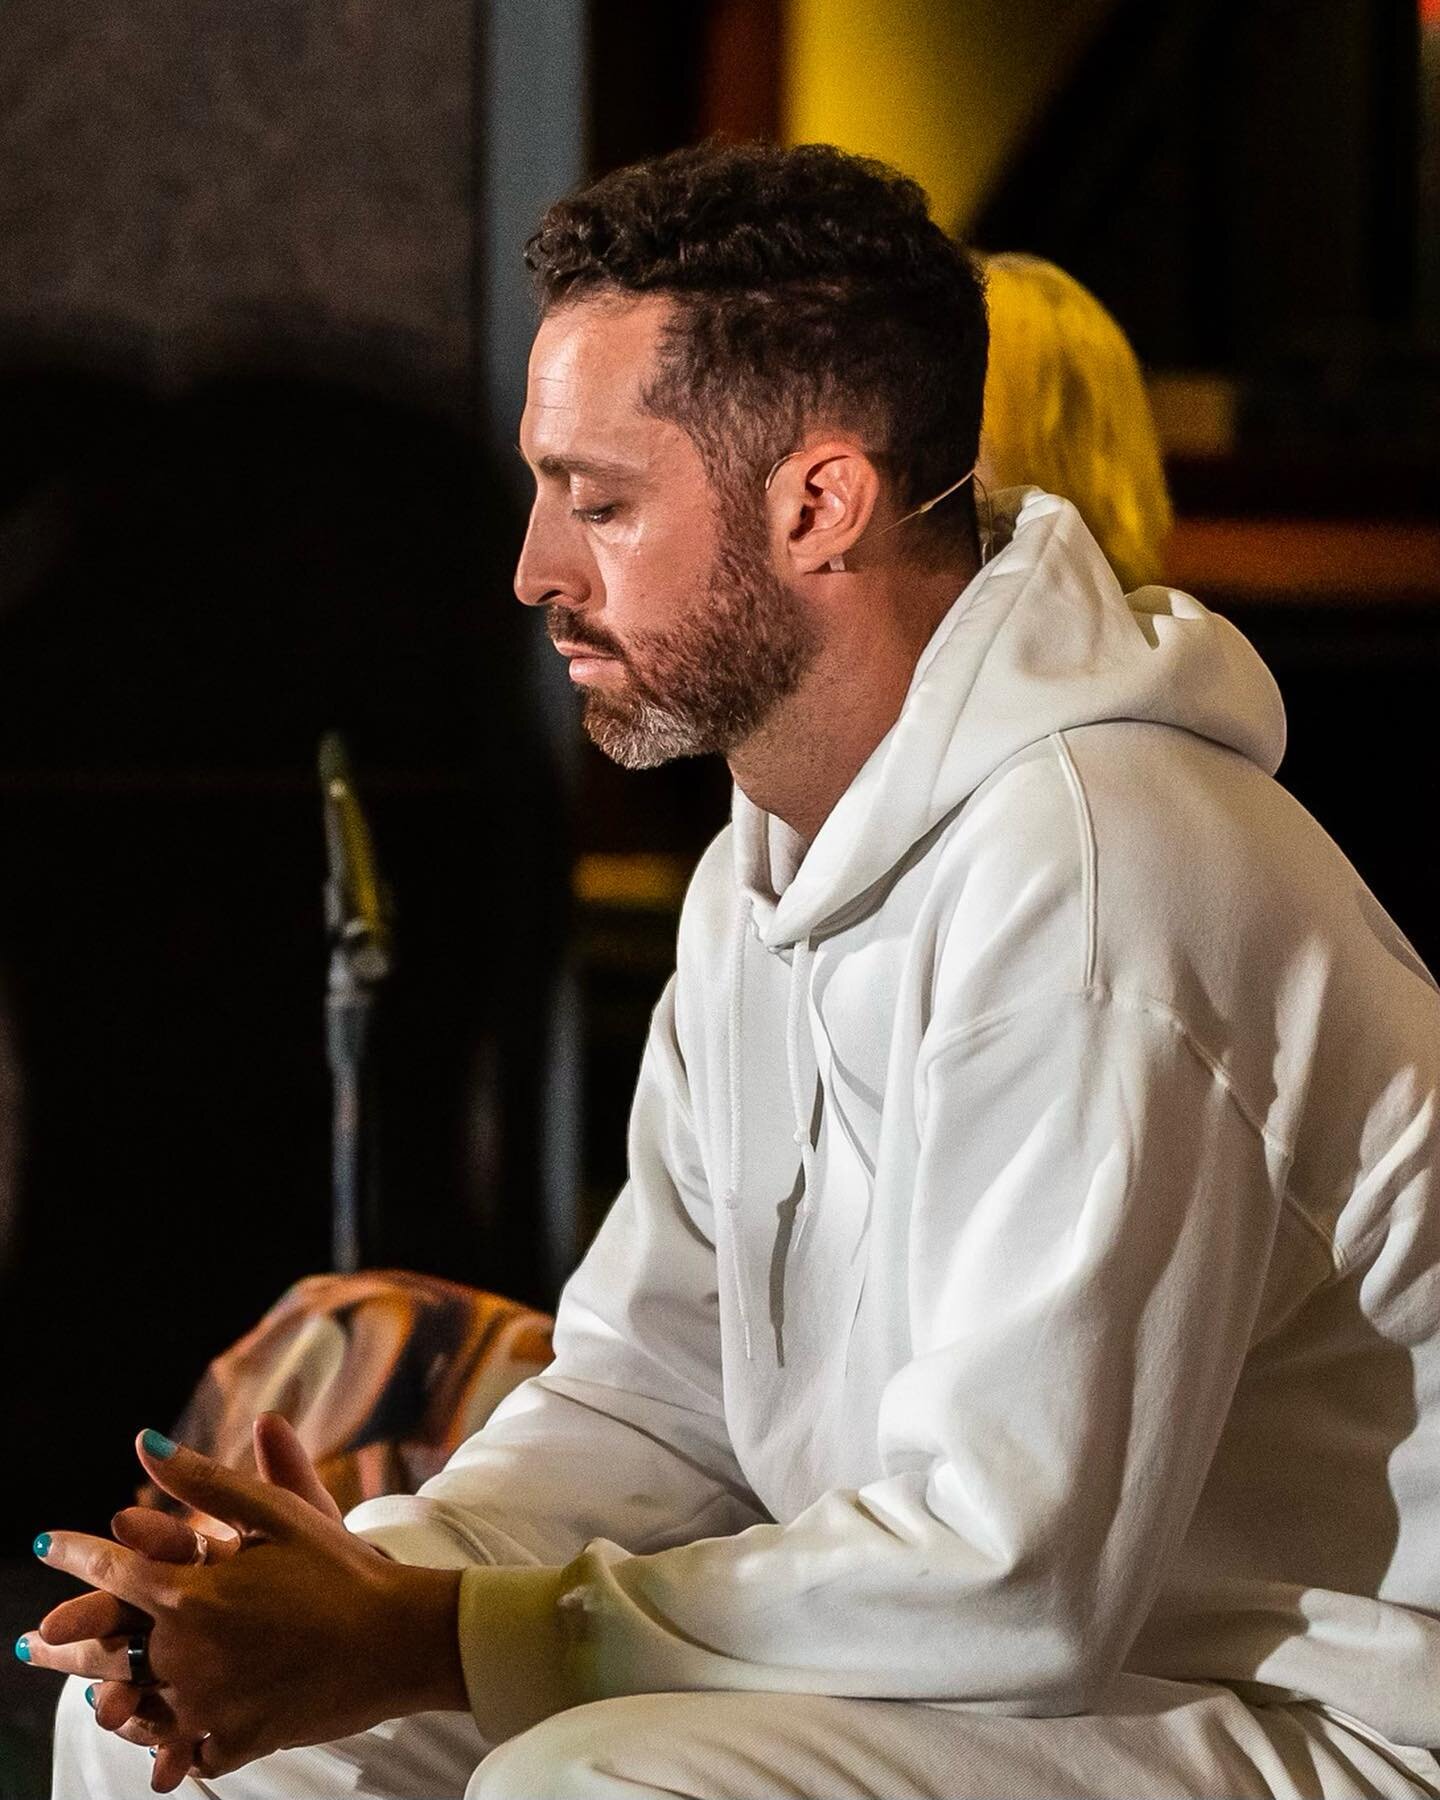 This is @jesseisrael &mdash; he&rsquo;s the founder of The Big Quiet. If you joined us on tour this 🍁 fall, he hosted the event and led the breathwork &amp; meditation.

Named &quot;The Meditation Expert&quot; by The New York Times, Jesse has led so